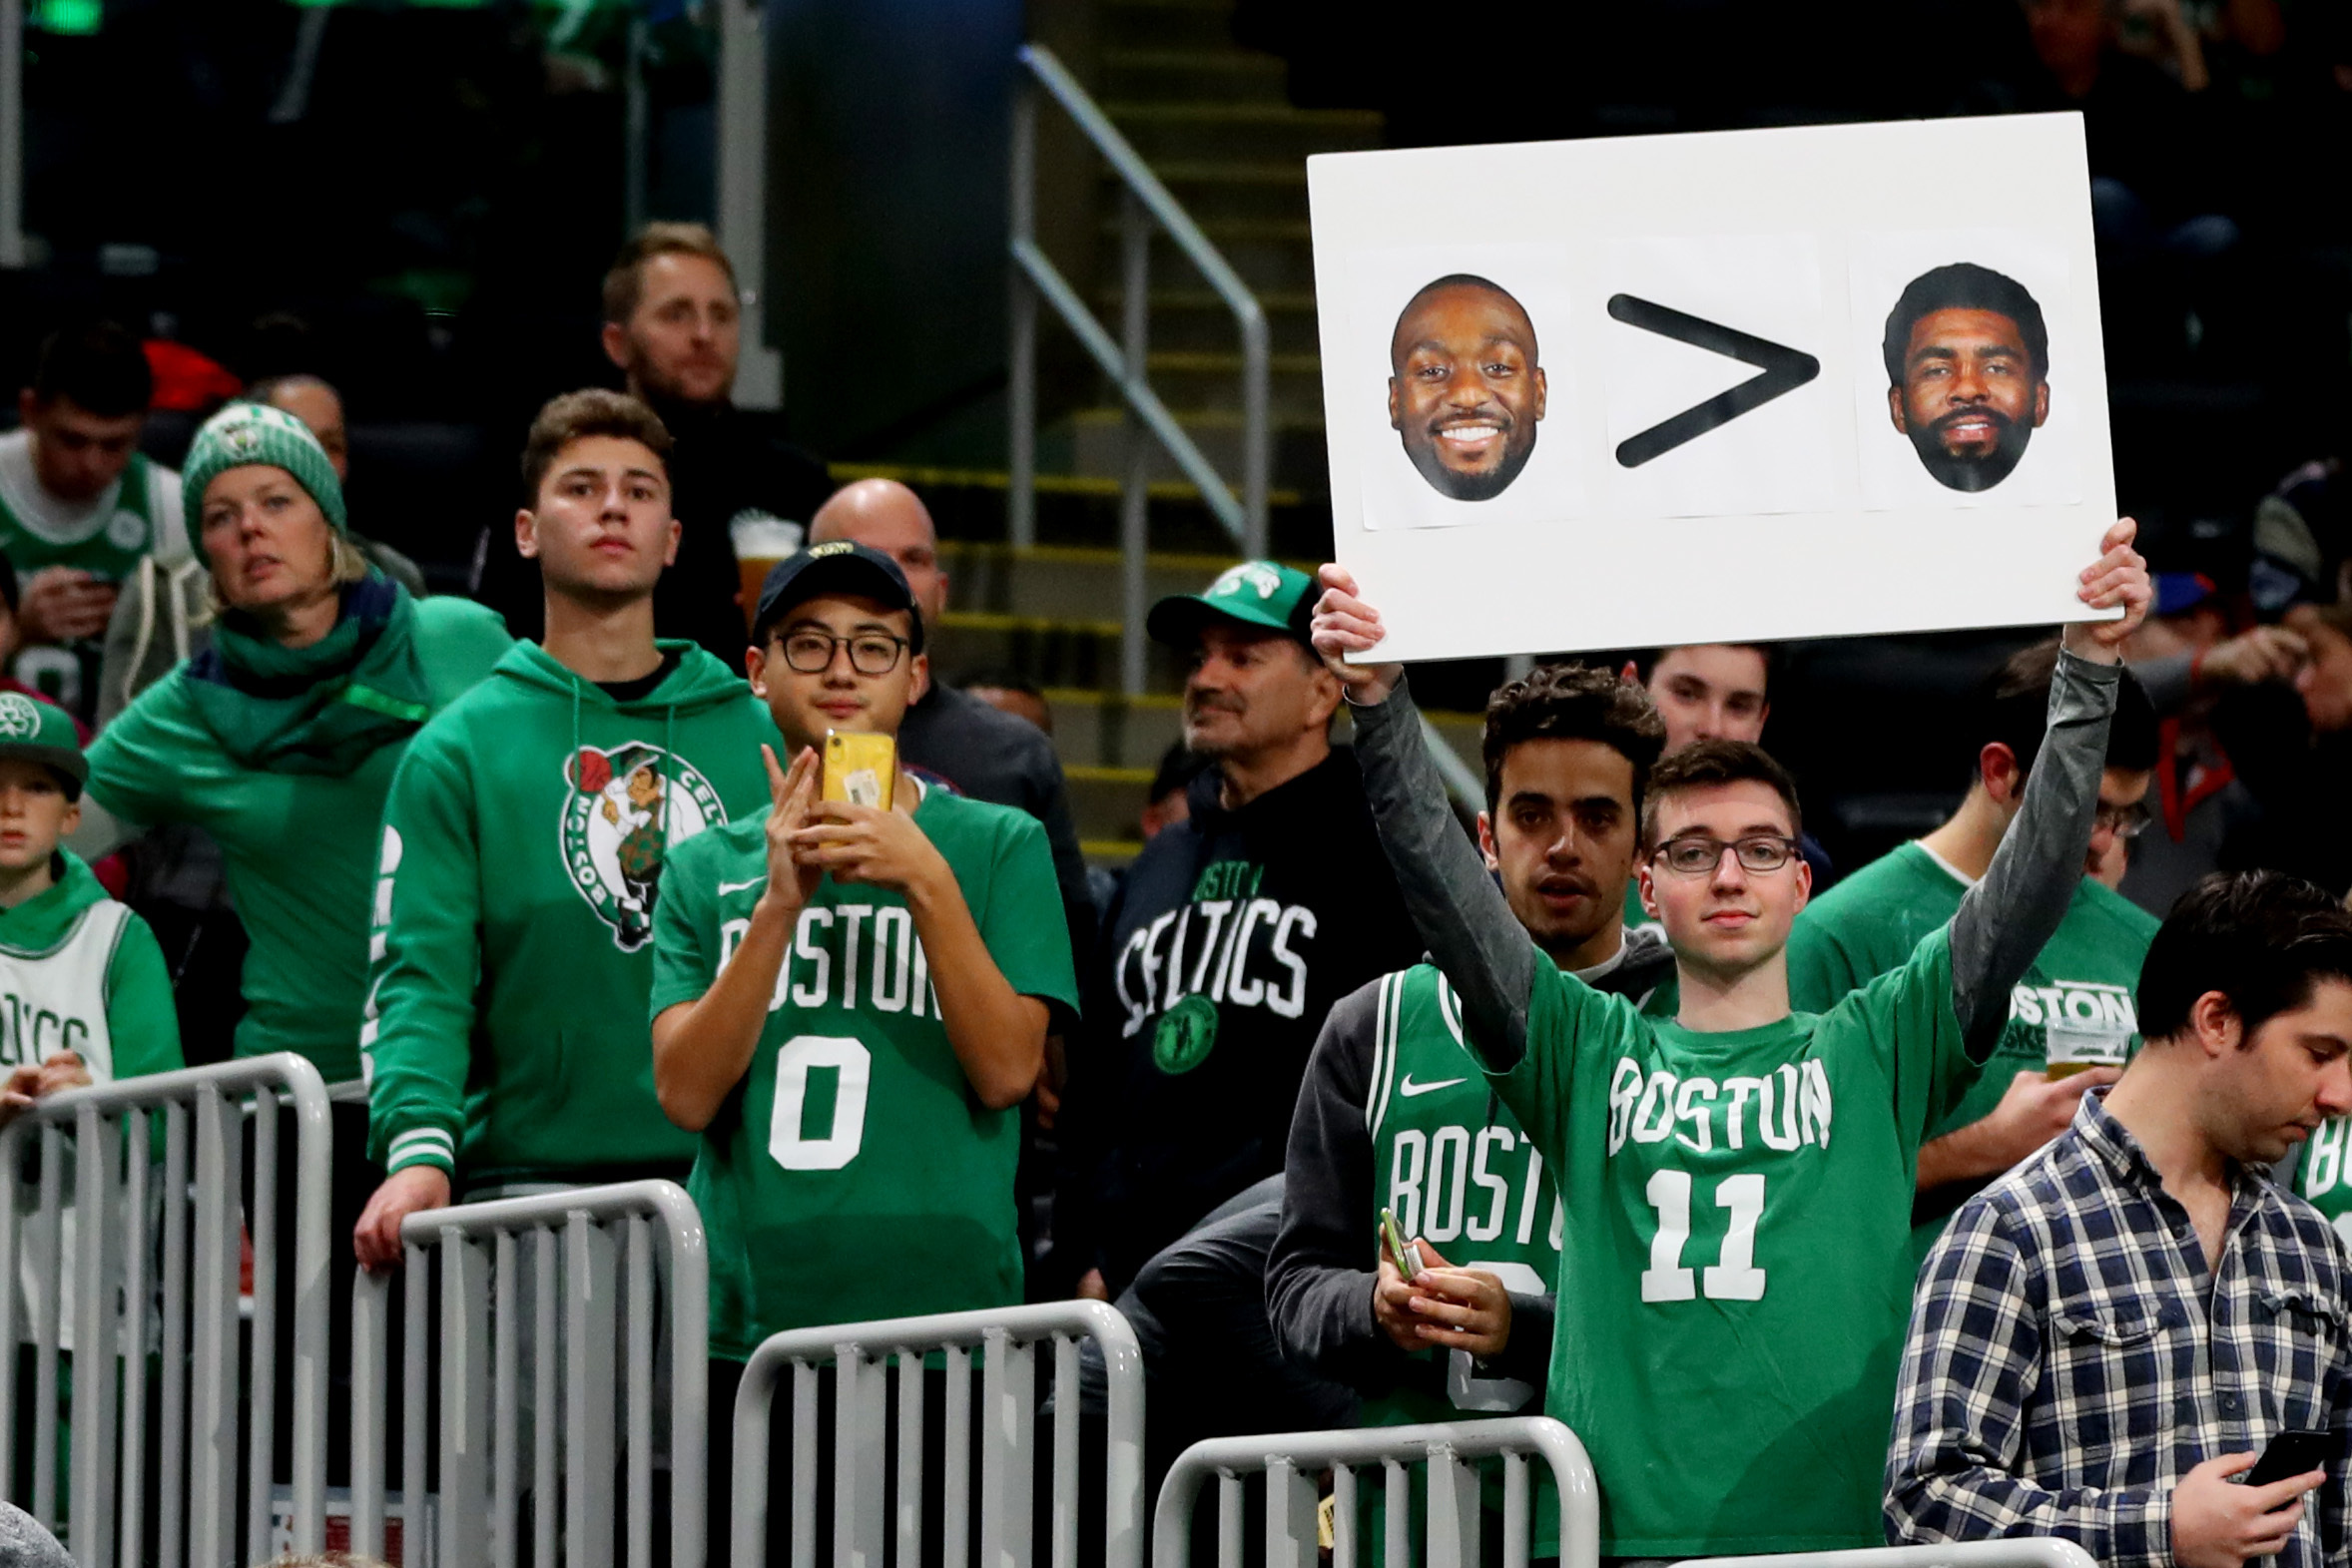 Kyrie sucks!': Celtics fans remind Kyrie Irving he's not welcome in Boston  amid Nets blowout